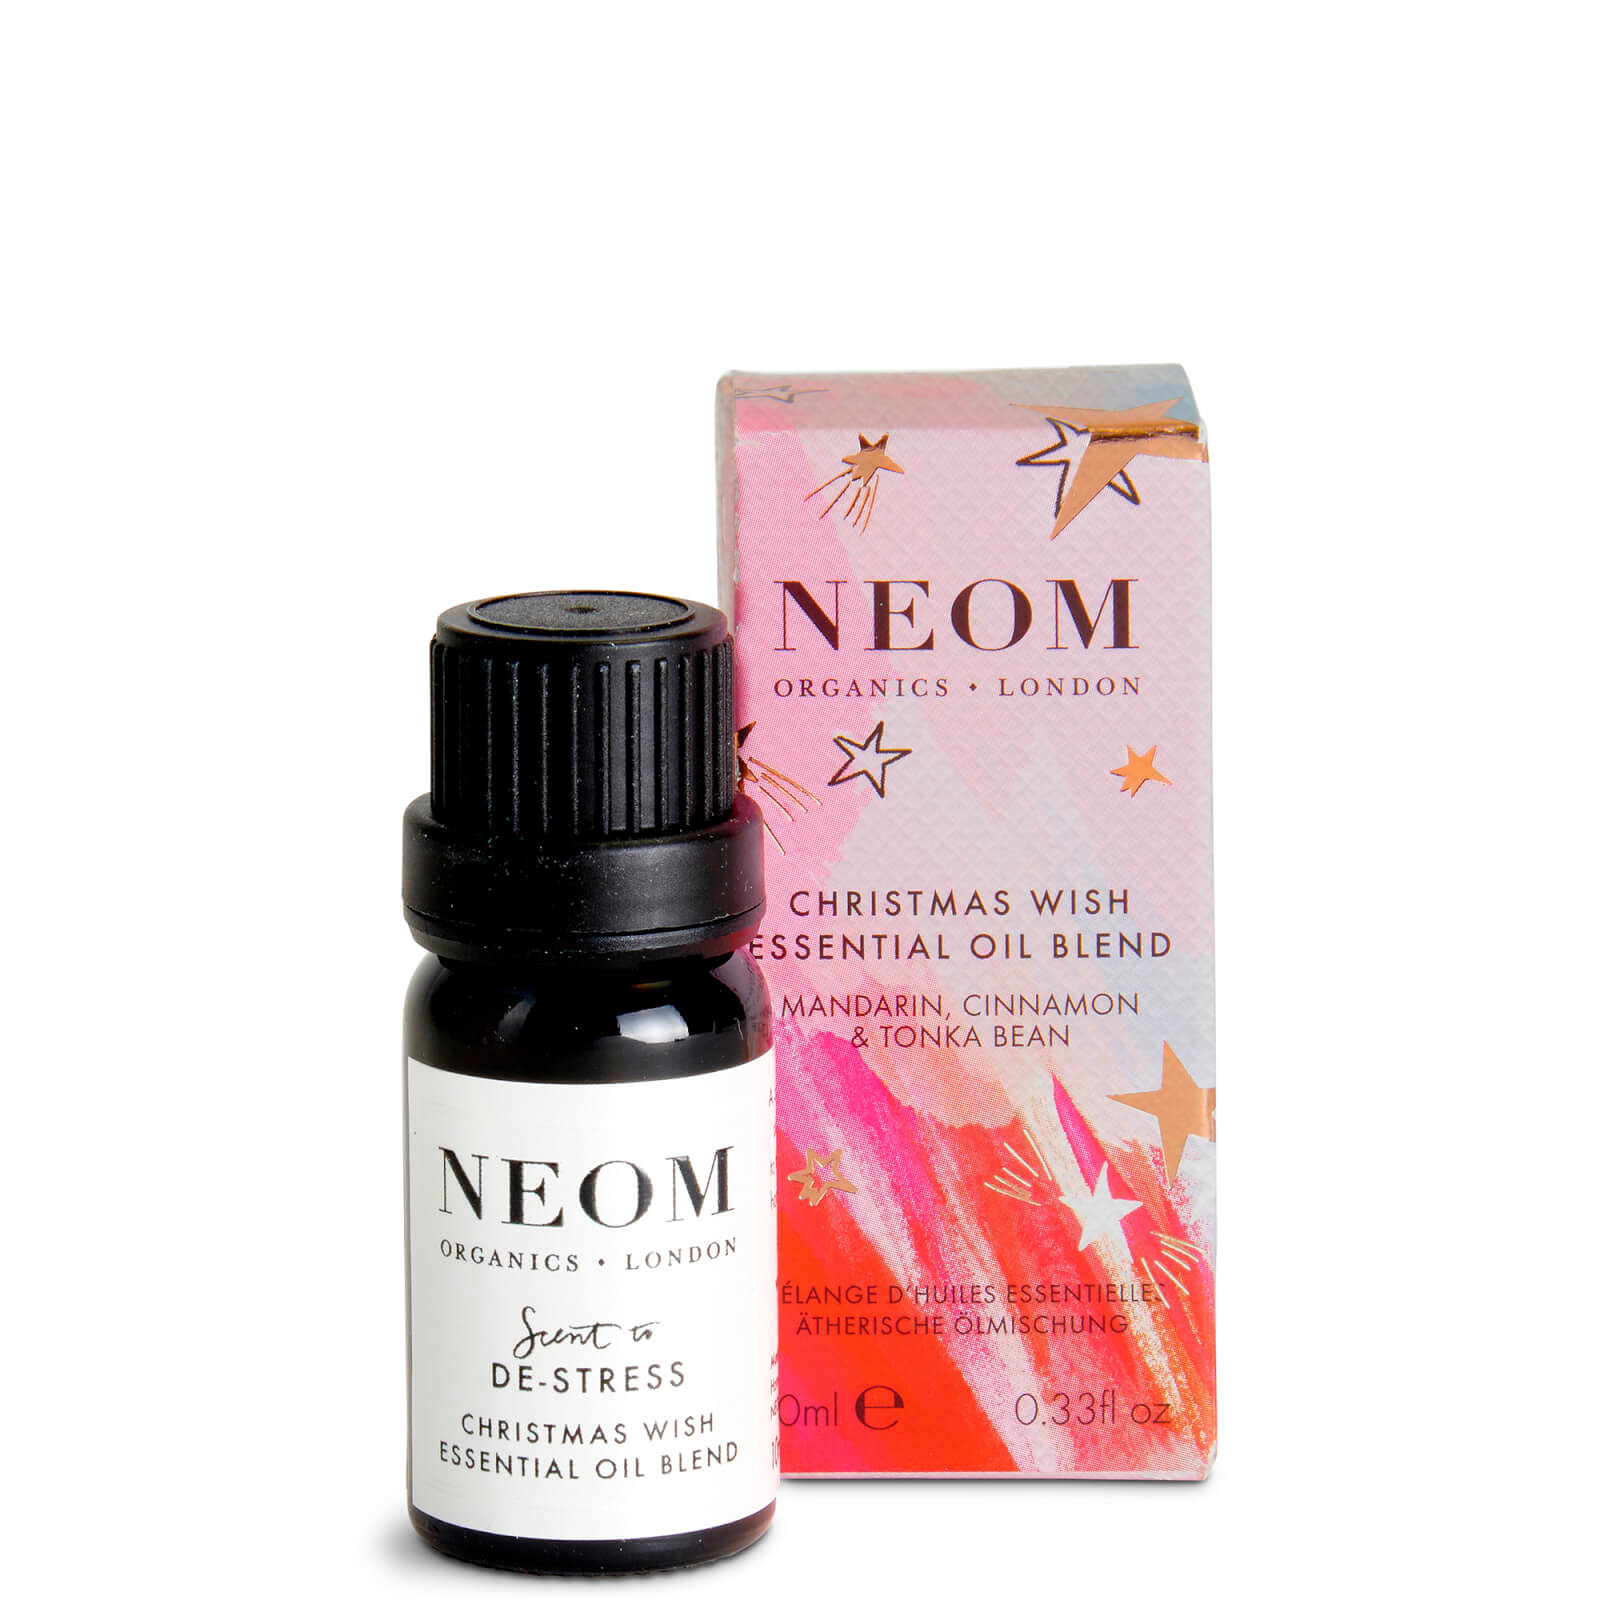 NEOM Christmas Wish Essential Oil Blend 10ml product